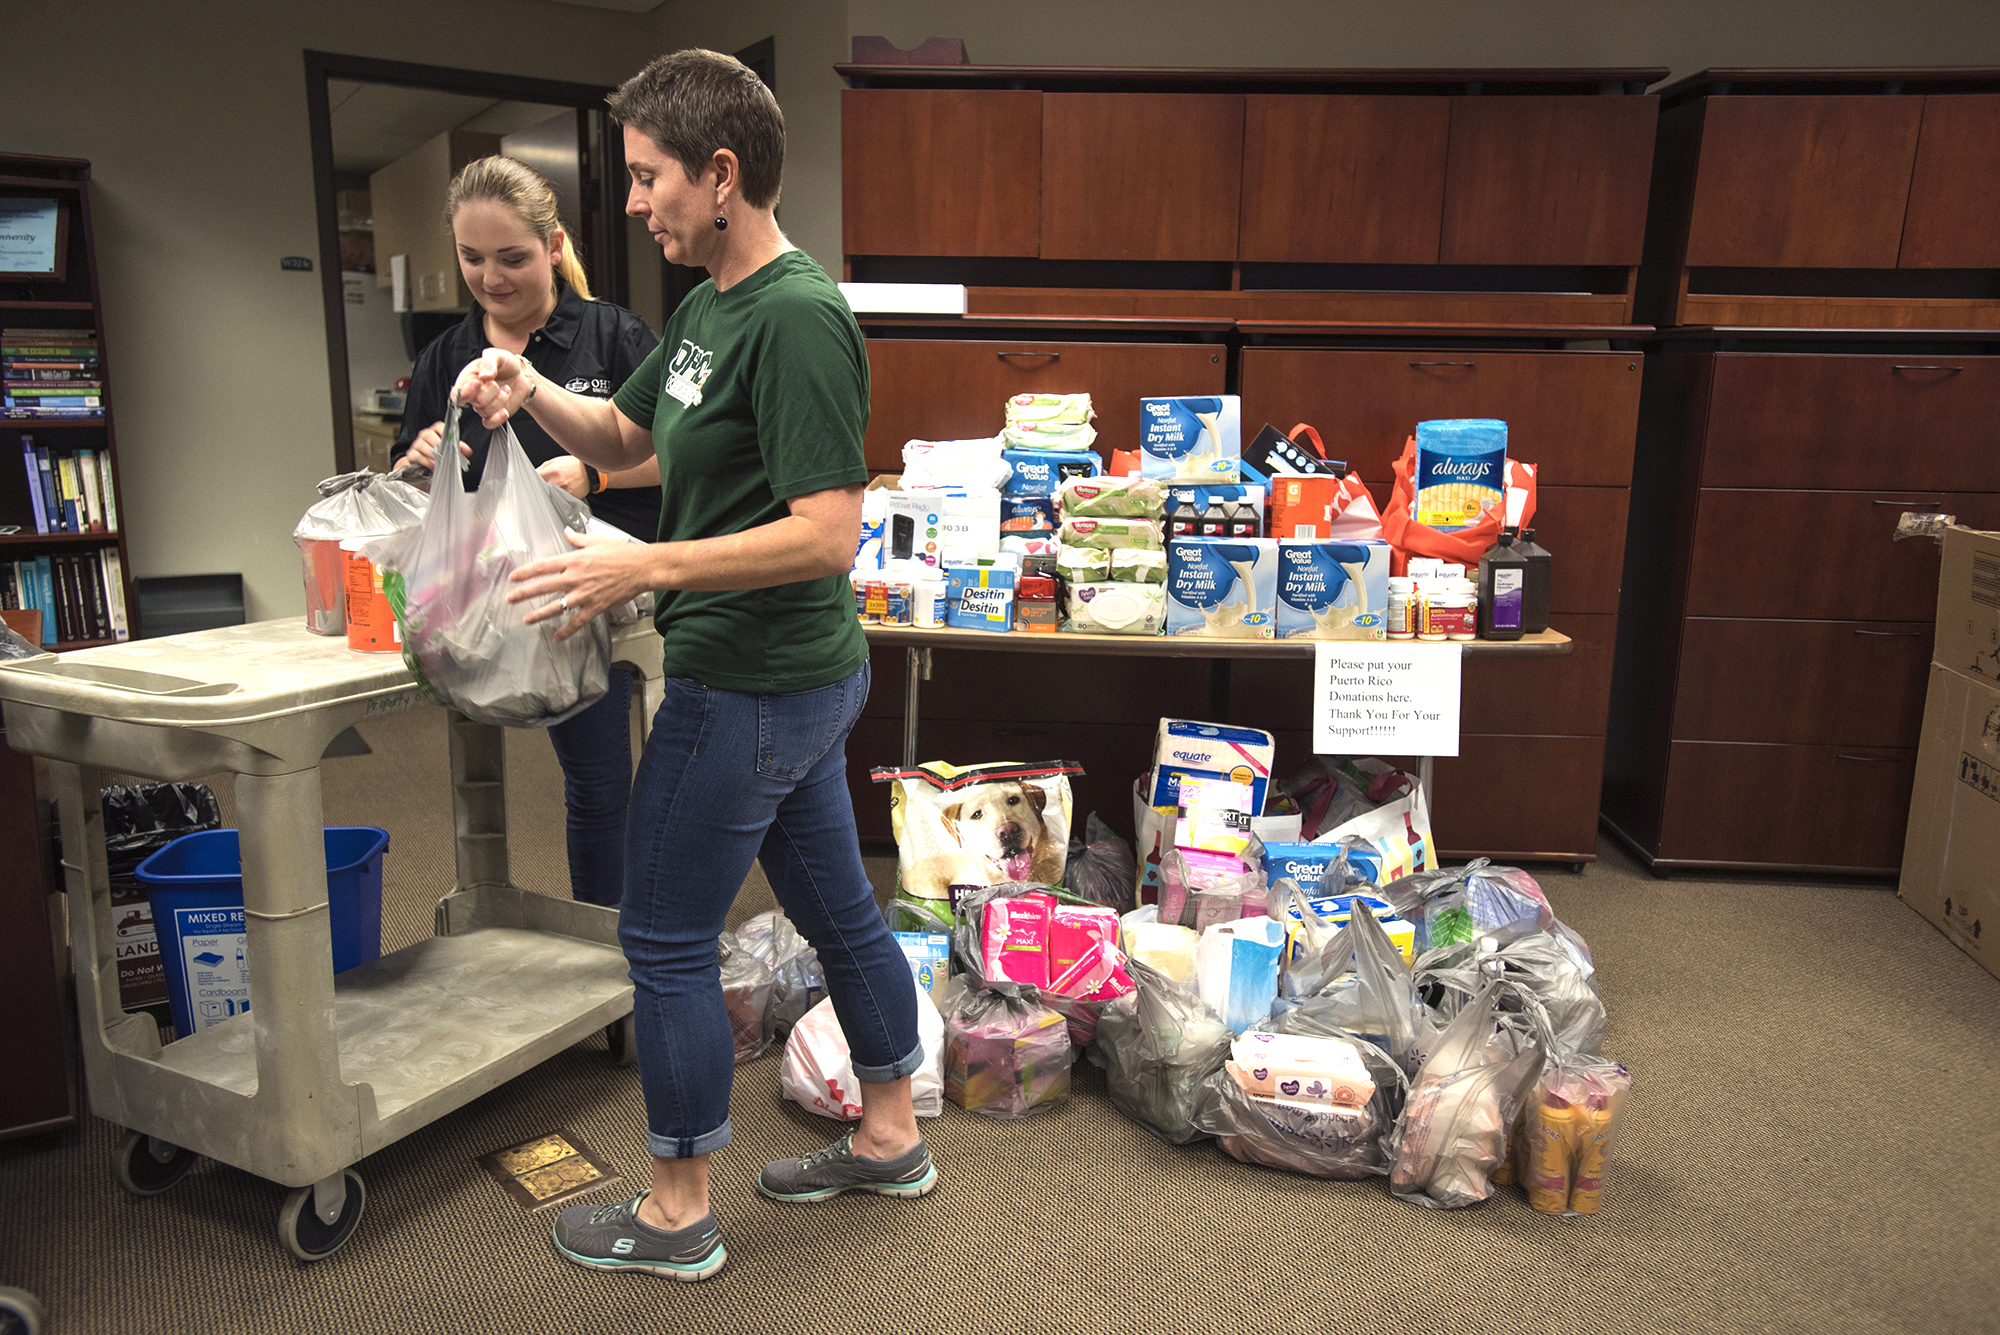 The OHIO College of Health Sciences and Professions’ Department of Social and Public Health chair Tania Basta and SPH administrative specialist Lindsay Radomski loaded carts to transport the donations from the office to Ohio University’s airport.